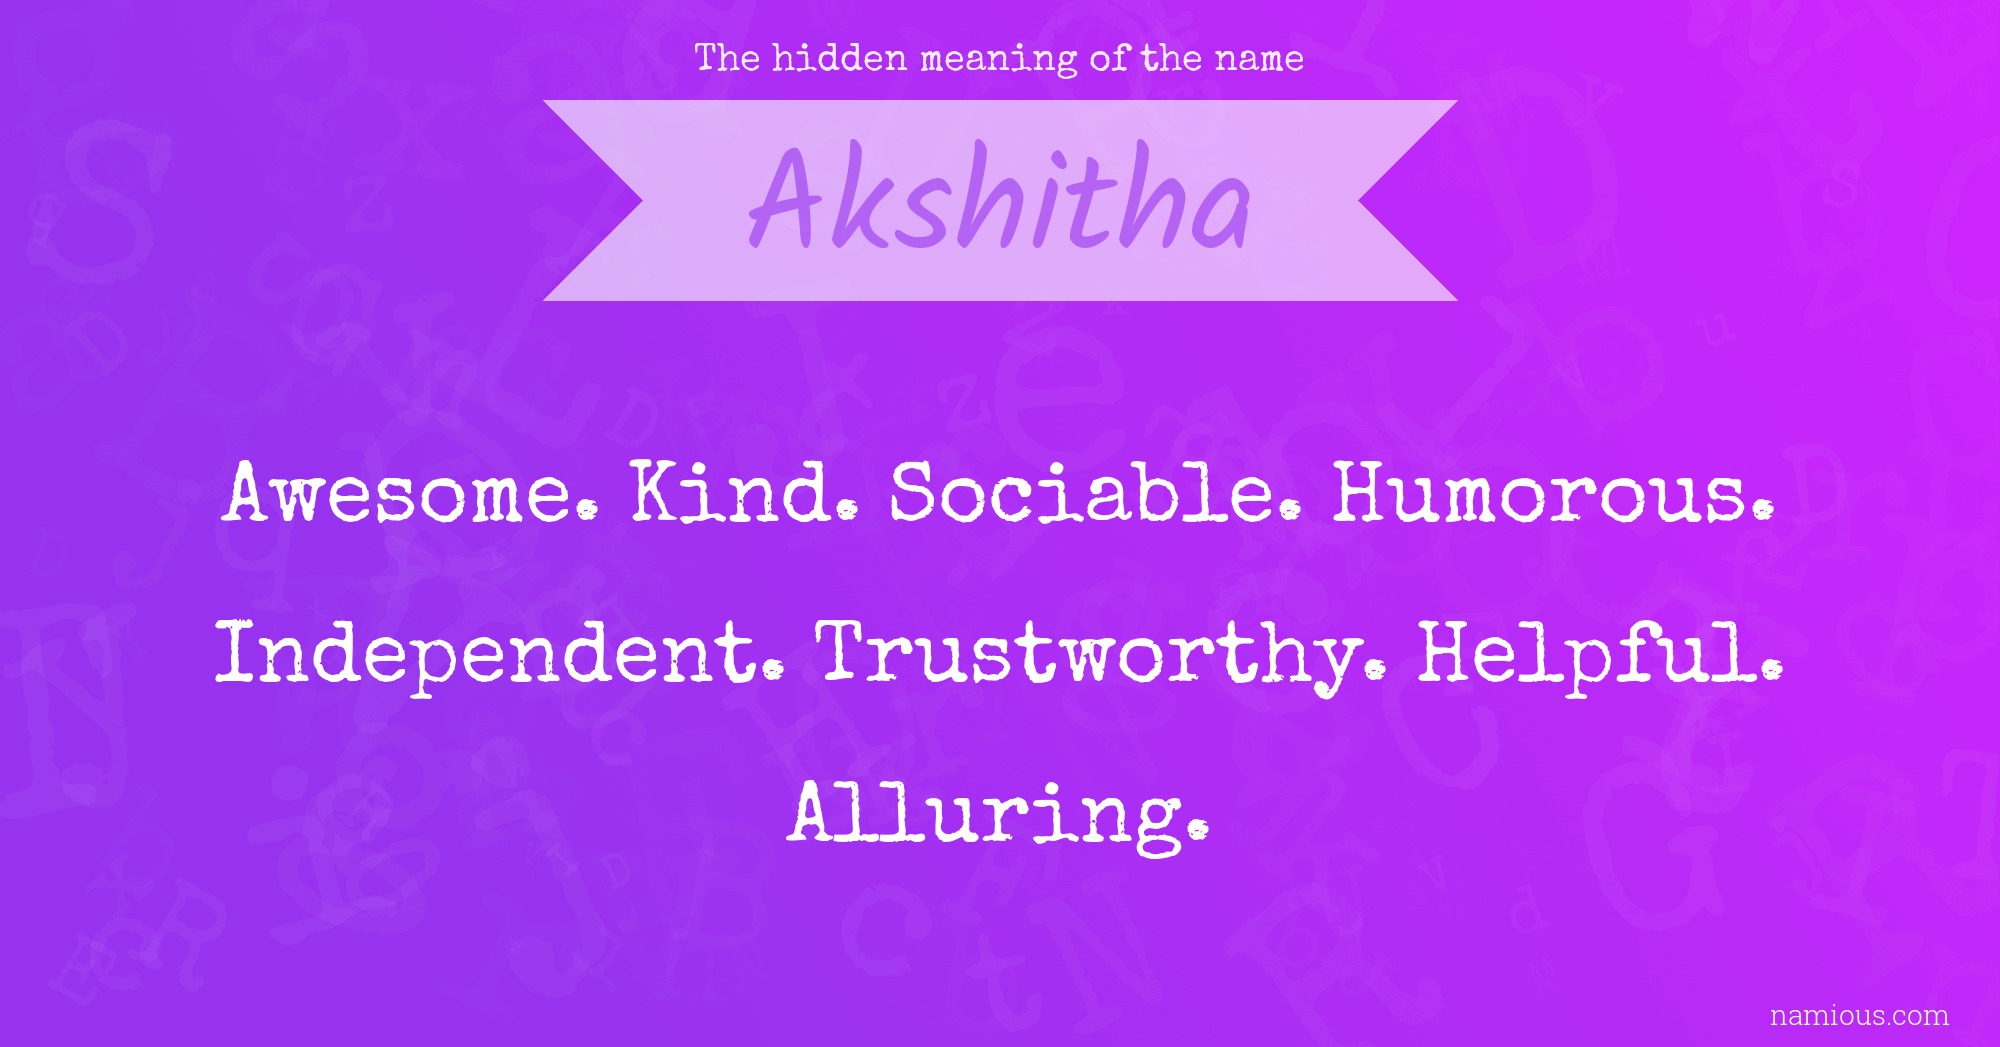 The hidden meaning of the name Akshitha